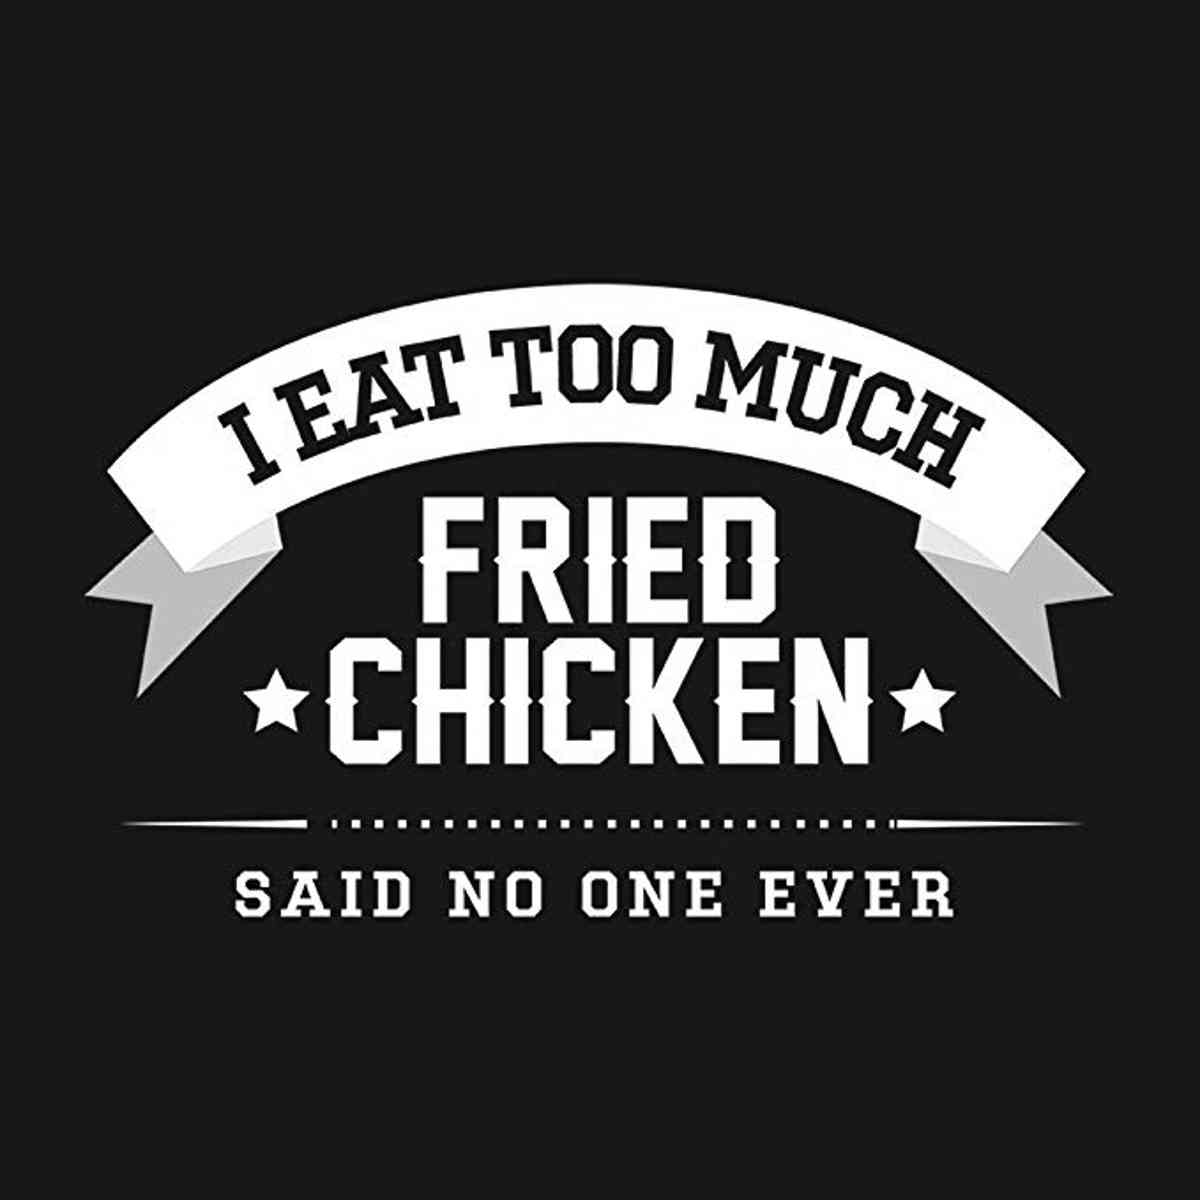 A logo about nobody ever saying that they eat too much fried chicken